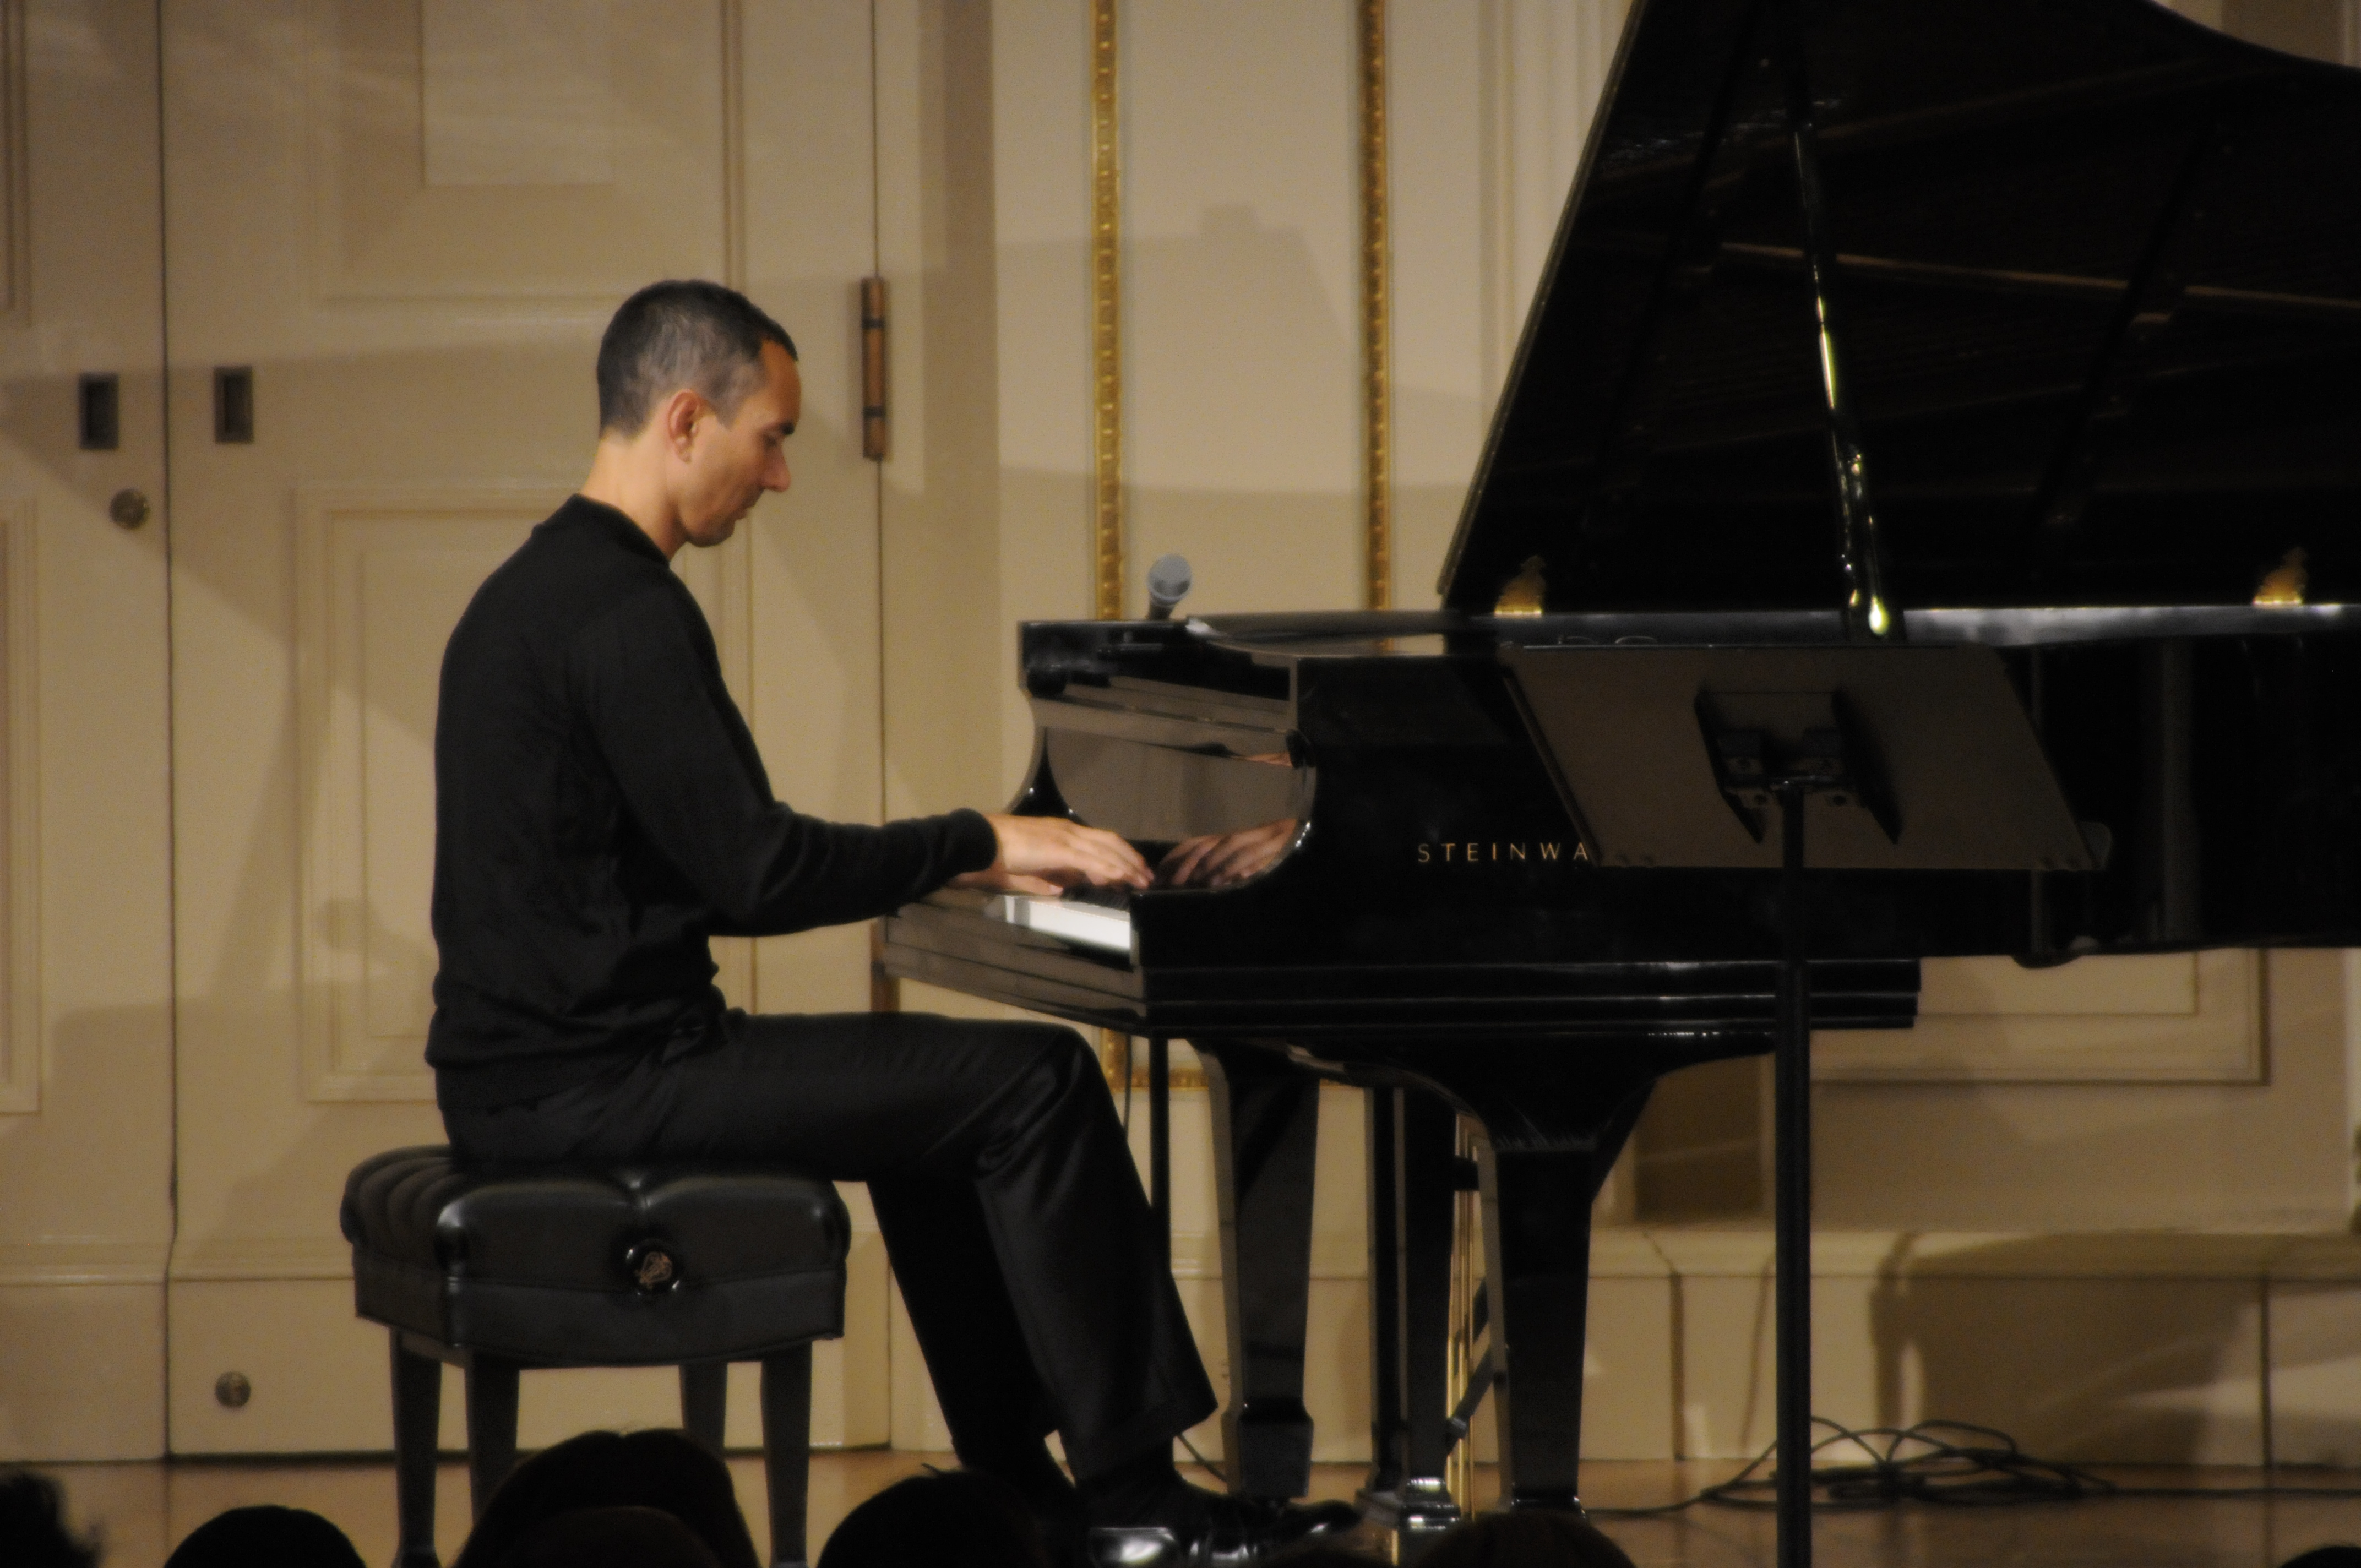 Vincent opened the second half of his Carnegie debut with the Rachmaninoff Prelude Op3, No.2. That evening he announced to the sold out crowd he had just received 2 Grammy Nominations. There was an immediate standing ovation!